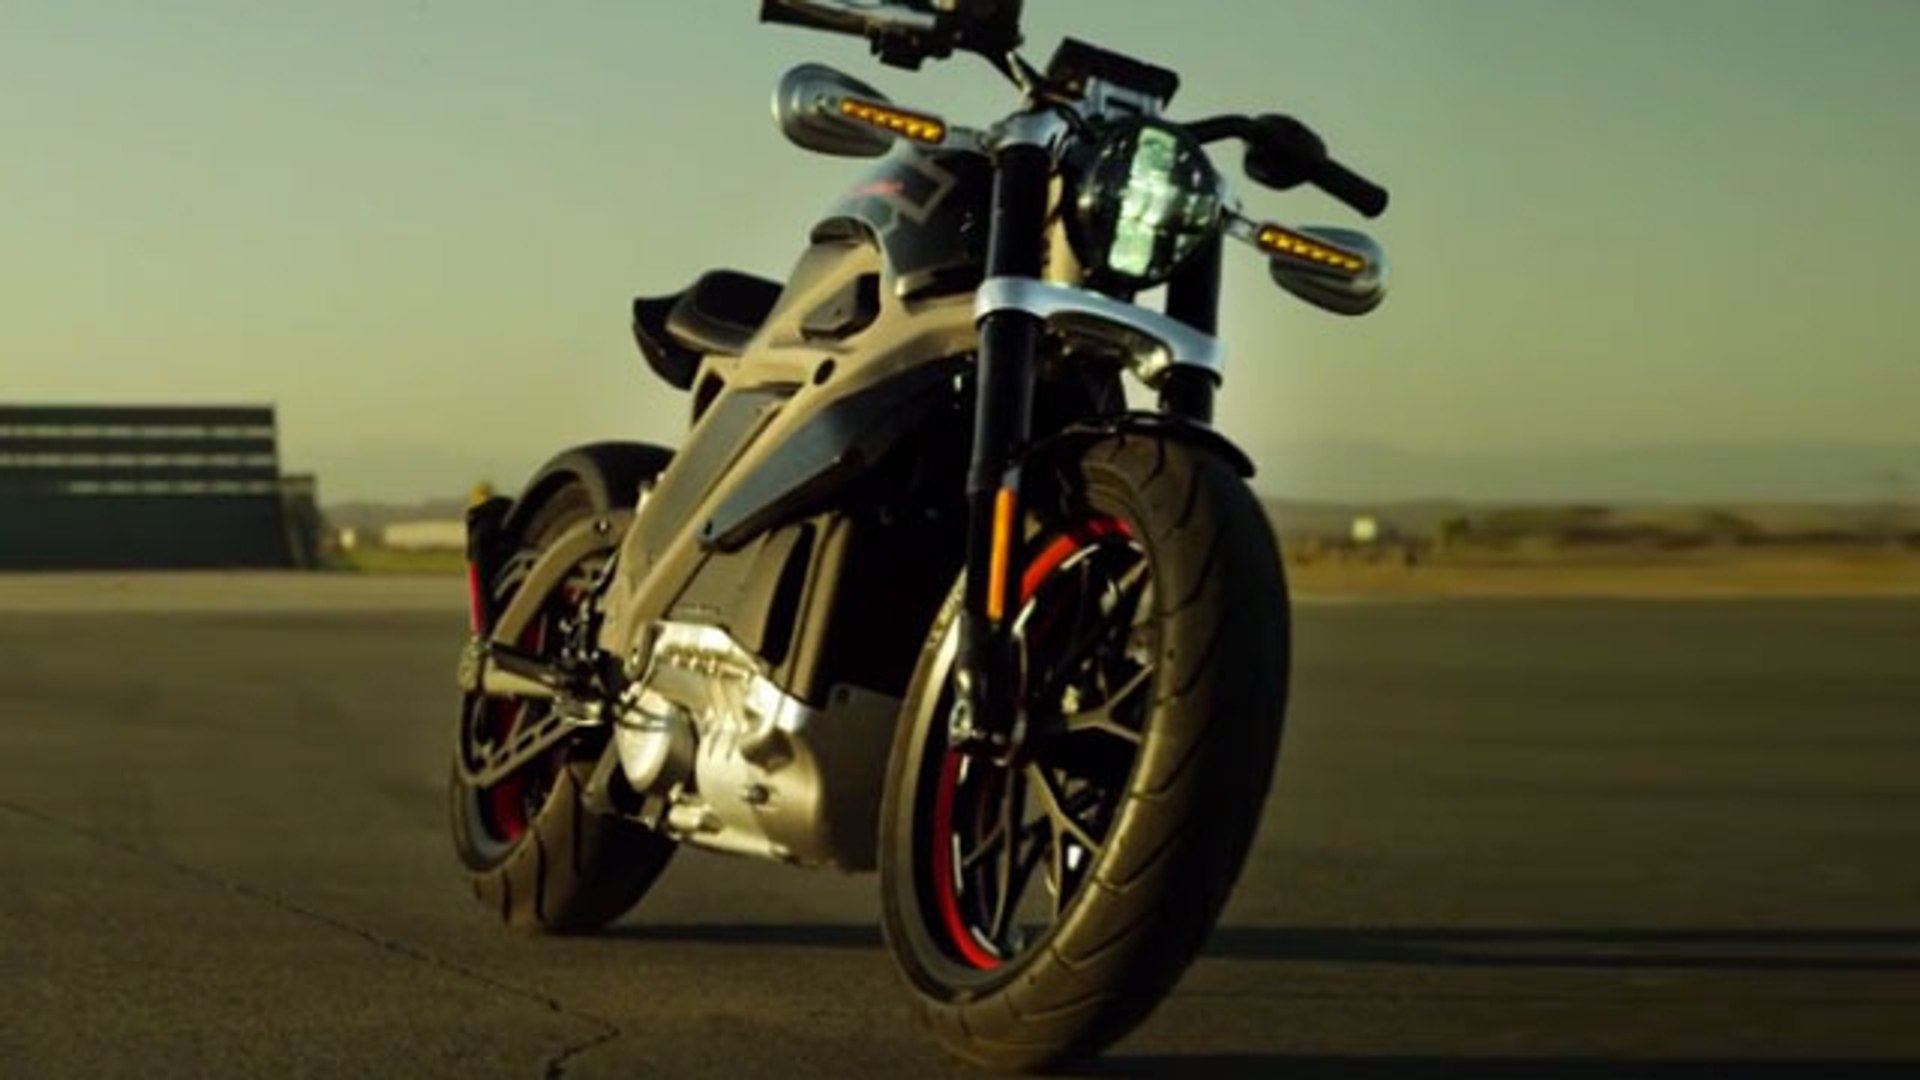 Harley-Davidson Project LiveWire -- The First Electric Harley-Davidson Motorcycle Revealed